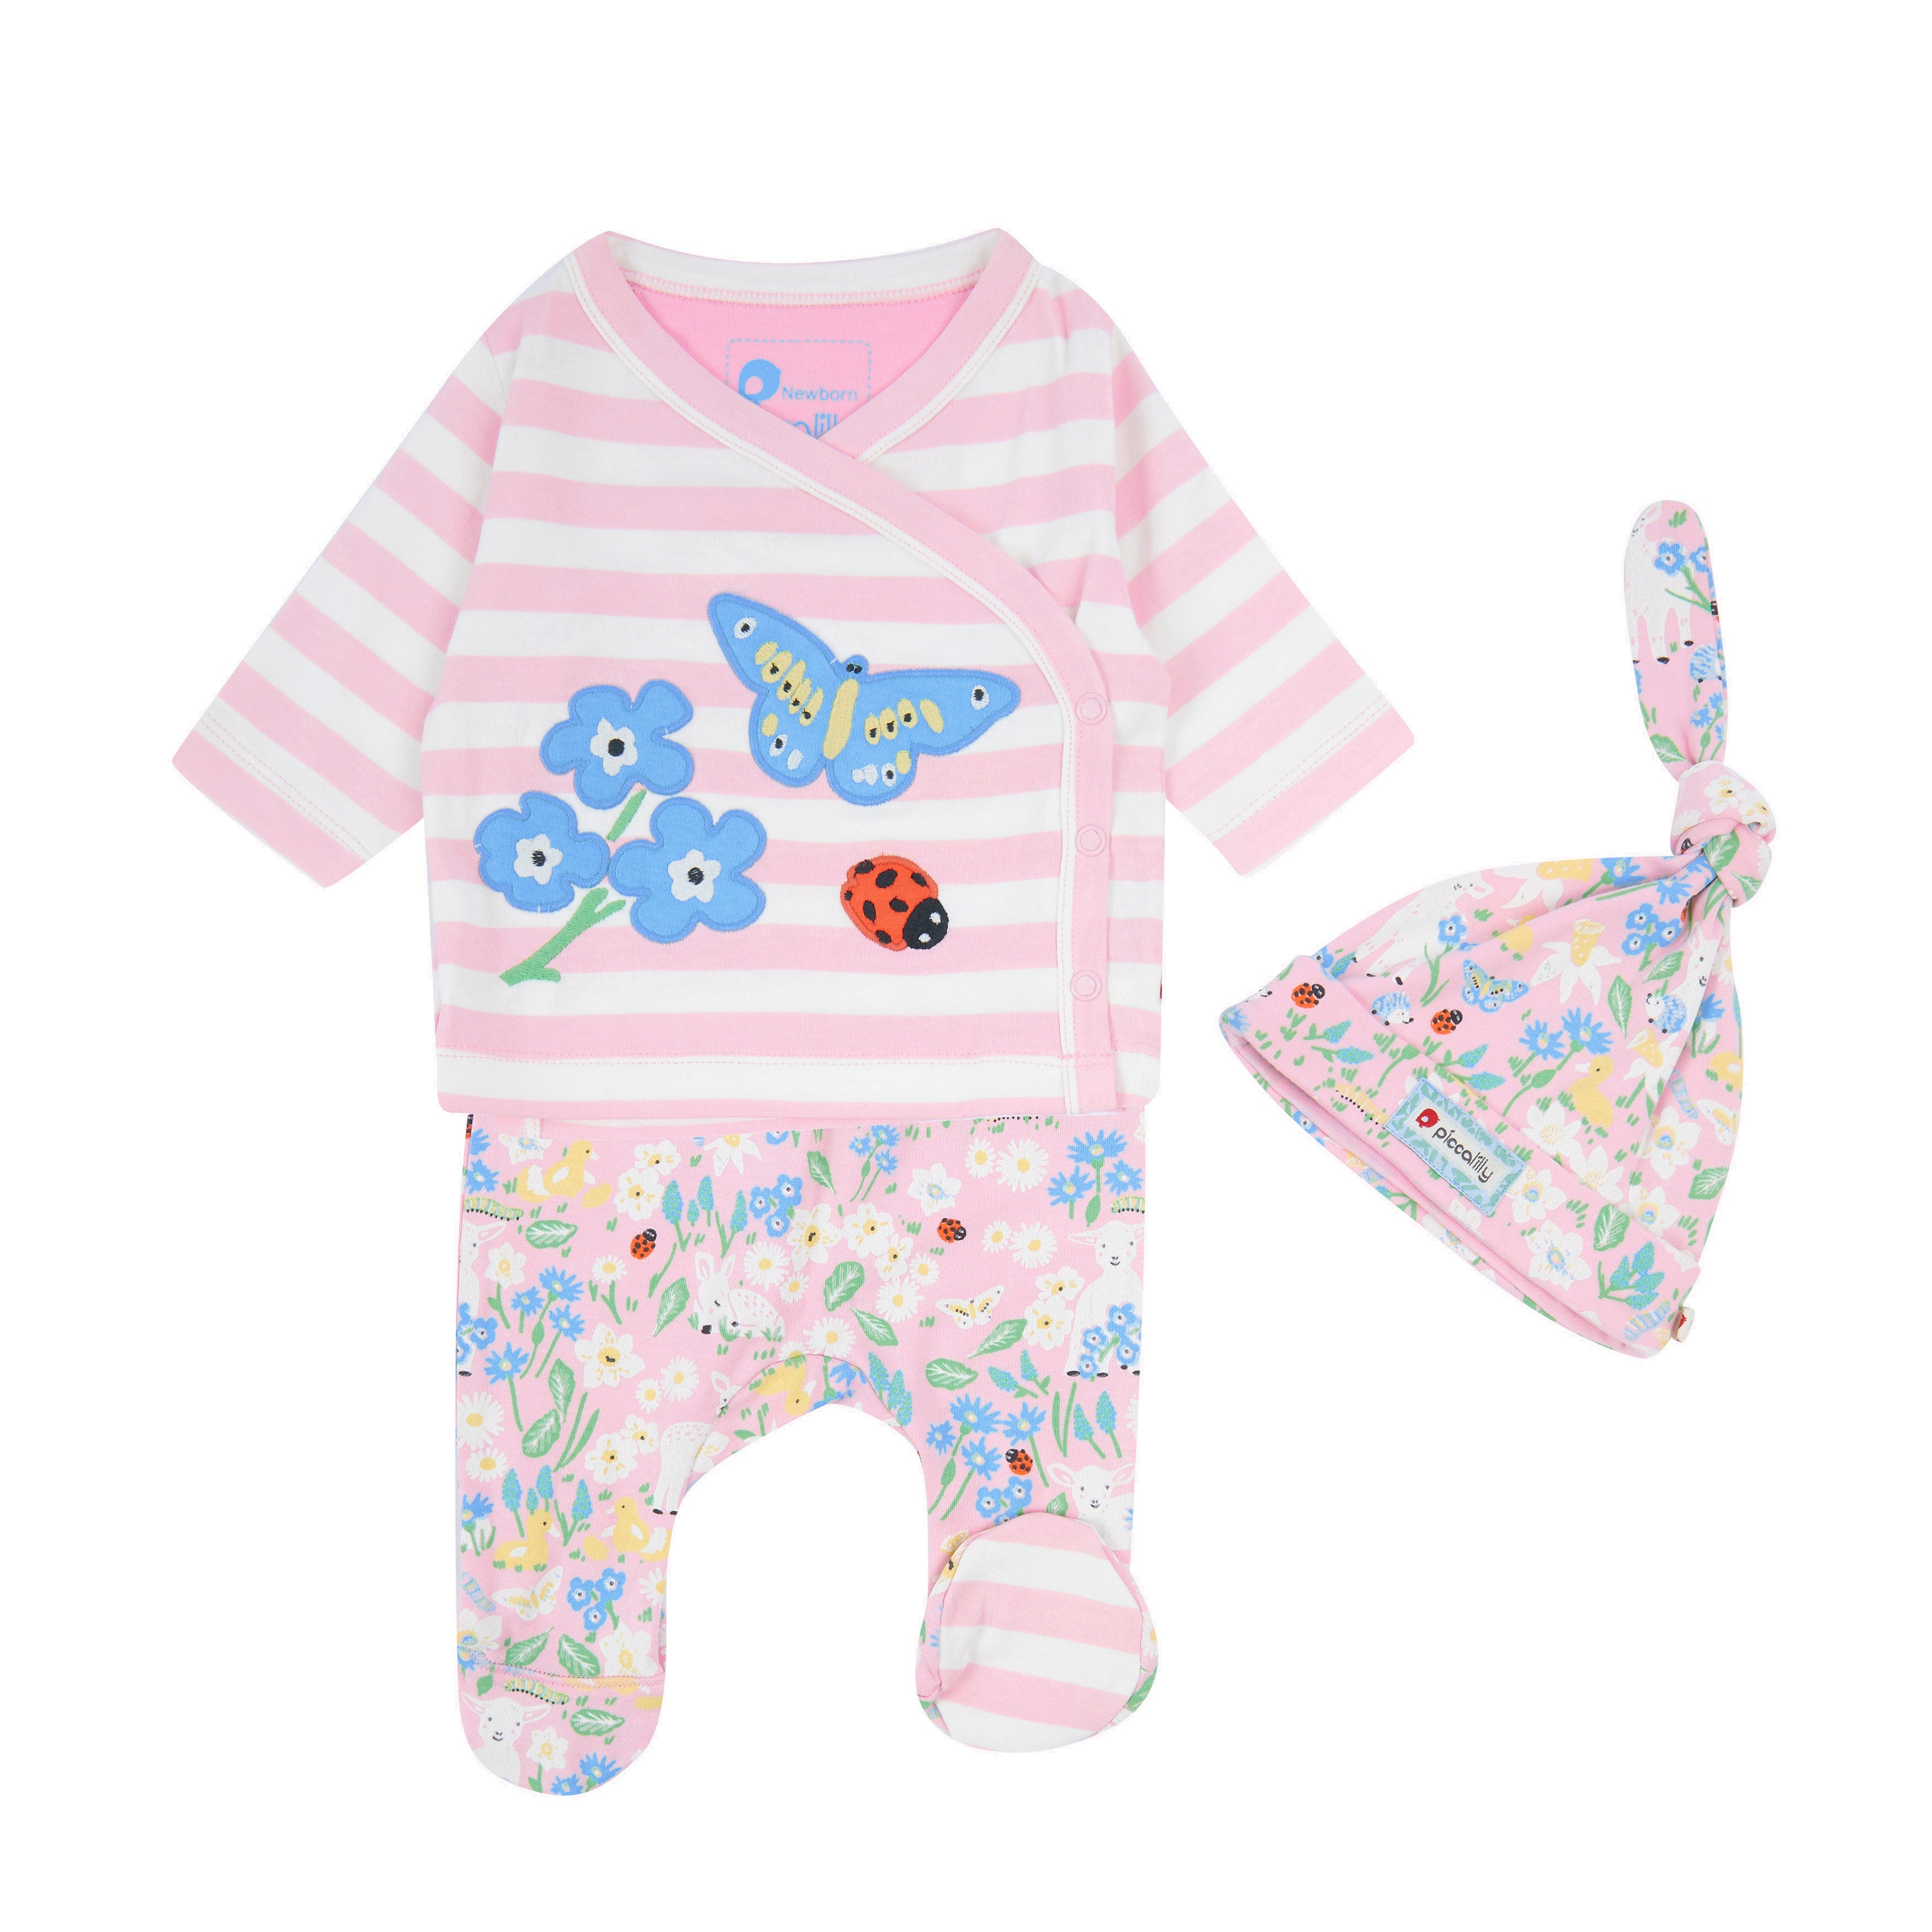 Piccalilly 3 Piece Baby Set - Little Lamb